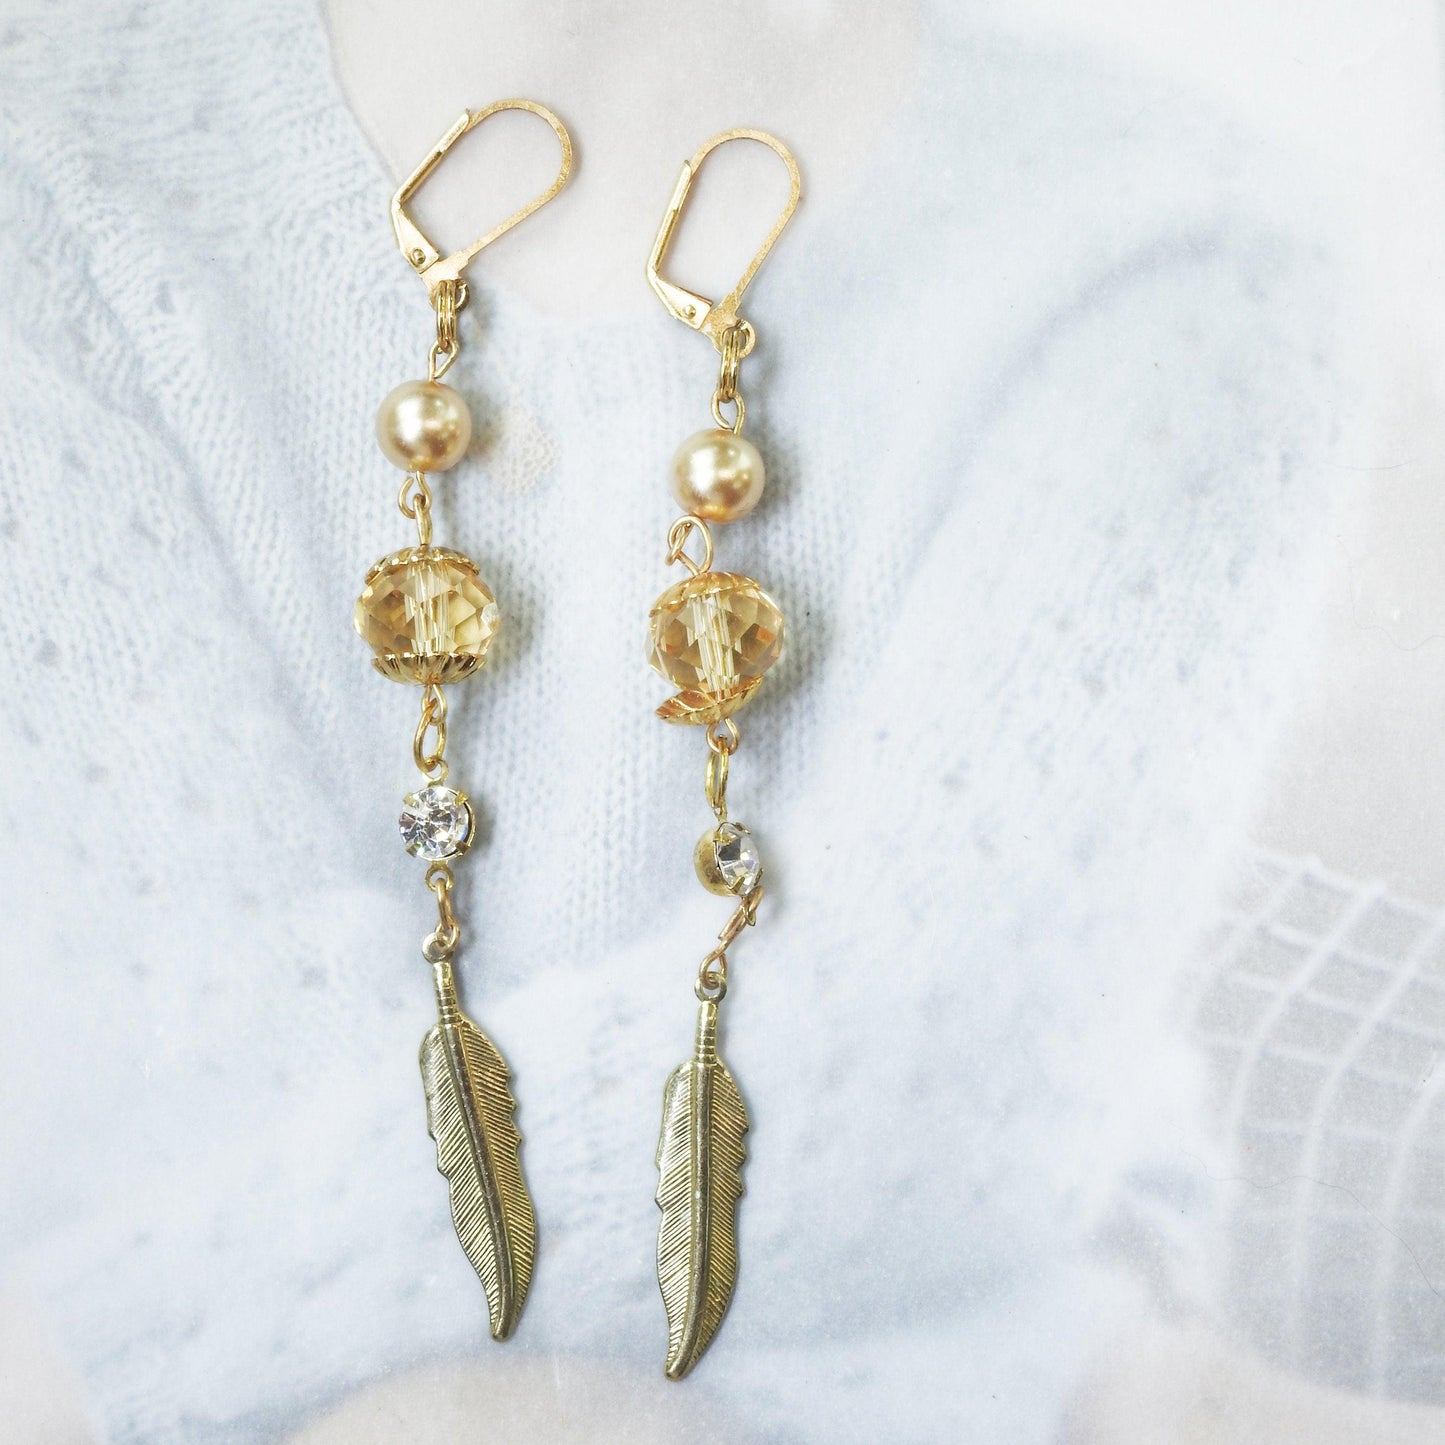 Extra long feather earrings dangle, handmade with beads and rhinestones, for birthday gift. They are fancy, trendy, boho and beautiful